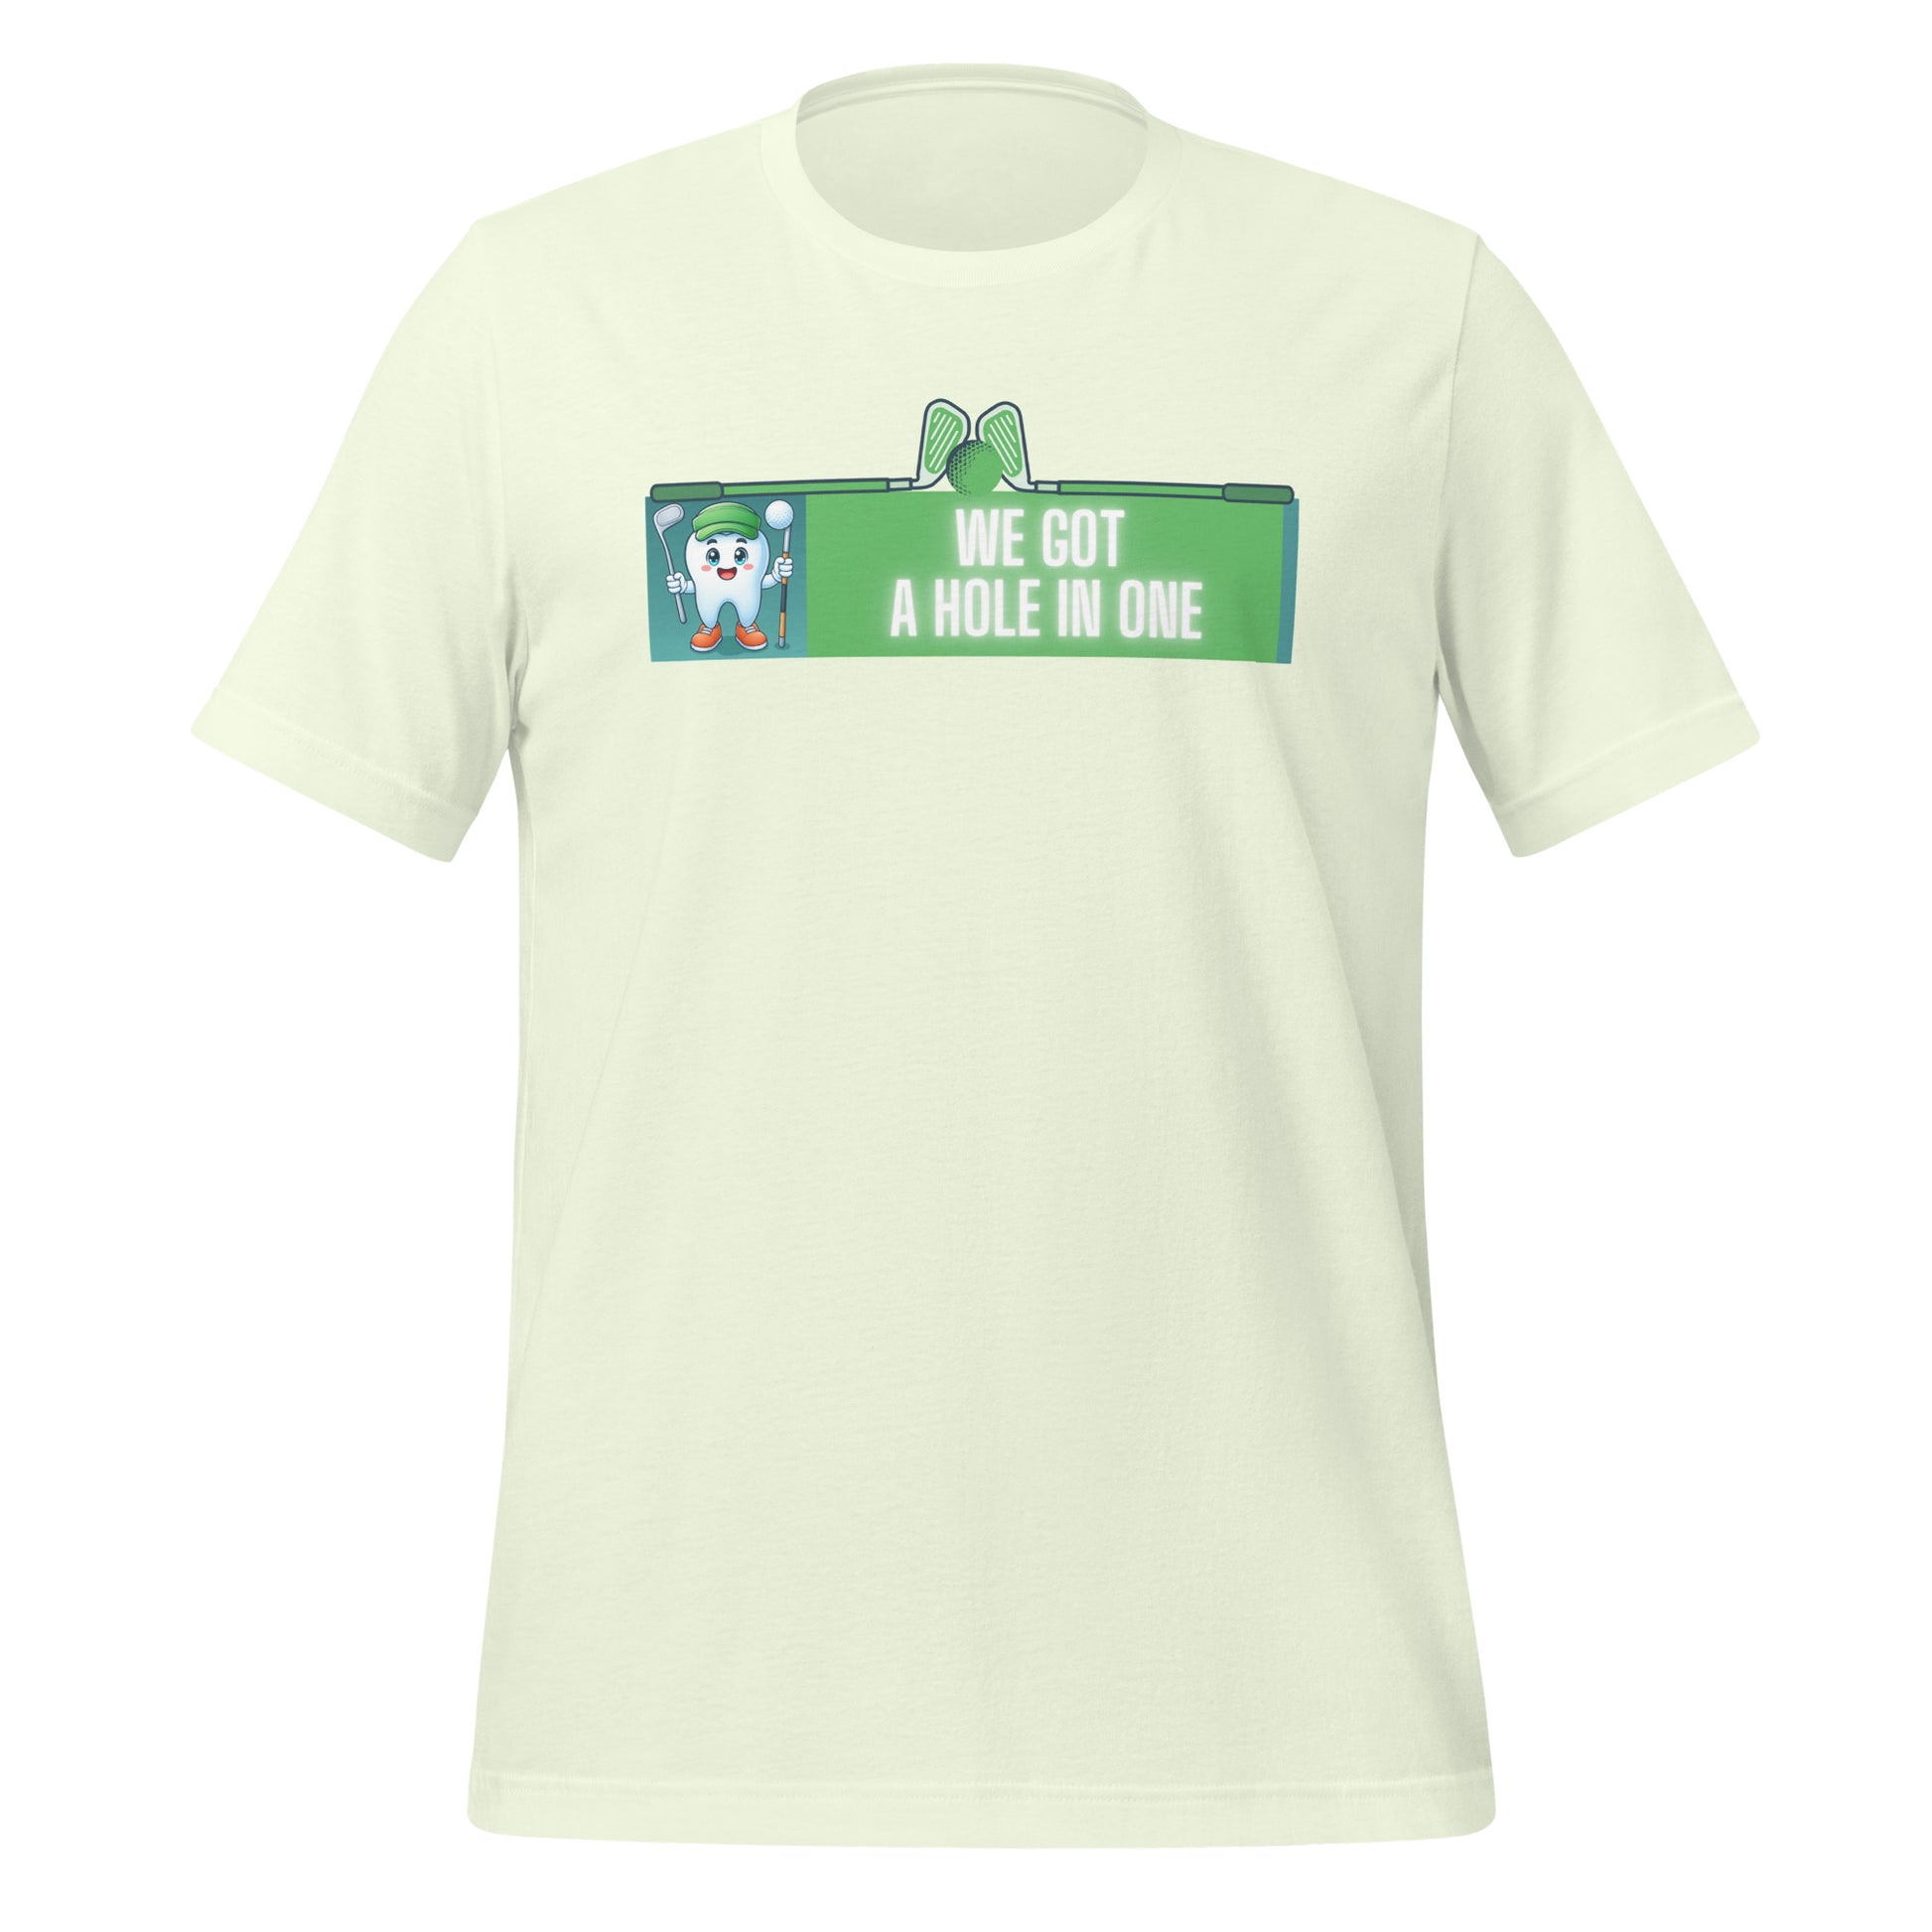 Cute dentist t-shirt showcasing an adorable tooth character in golf attire, joyfully celebrating a ‘hole in one’ achievement, perfect for dentist and dental professionals seeking unique and thematic dental apparel. Citron color, front view.